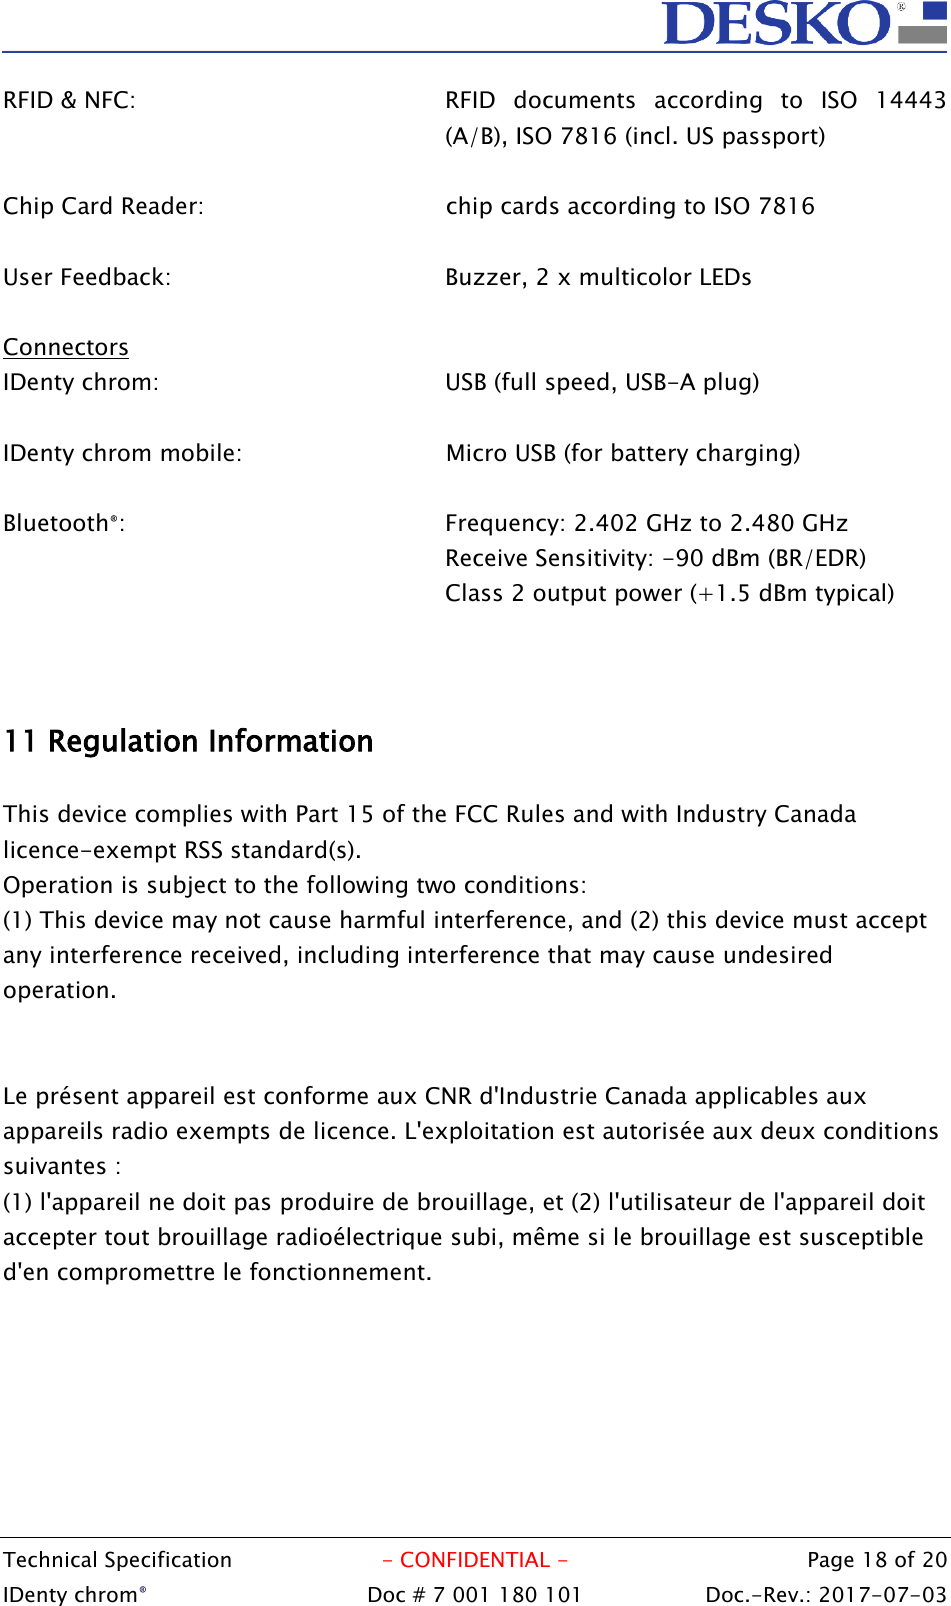  Technical Specification  - CONFIDENTIAL -  Page 18 of 20 IDenty chrom®  Doc # 7 001 180 101   Doc.-Rev.: 2017-07-03   RFID &amp; NFC:  RFID  documents  according  to  ISO  14443 (A/B), ISO 7816 (incl. US passport)  Chip Card Reader:    chip cards according to ISO 7816  User Feedback:  Buzzer, 2 x multicolor LEDs  Connectors IDenty chrom:  USB (full speed, USB-A plug)  IDenty chrom mobile:      Micro USB (for battery charging)  Bluetooth®:  Frequency: 2.402 GHz to 2.480 GHz Receive Sensitivity: -90 dBm (BR/EDR) Class 2 output power (+1.5 dBm typical)    11 Regulation Information  This device complies with Part 15 of the FCC Rules and with Industry Canada licence-exempt RSS standard(s). Operation is subject to the following two conditions: (1) This device may not cause harmful interference, and (2) this device must accept any interference received, including interference that may cause undesired operation.   Le présent appareil est conforme aux CNR d&apos;Industrie Canada applicables aux appareils radio exempts de licence. L&apos;exploitation est autorisée aux deux conditions suivantes :  (1) l&apos;appareil ne doit pas produire de brouillage, et (2) l&apos;utilisateur de l&apos;appareil doit accepter tout brouillage radioélectrique subi, même si le brouillage est susceptible d&apos;en compromettre le fonctionnement.     